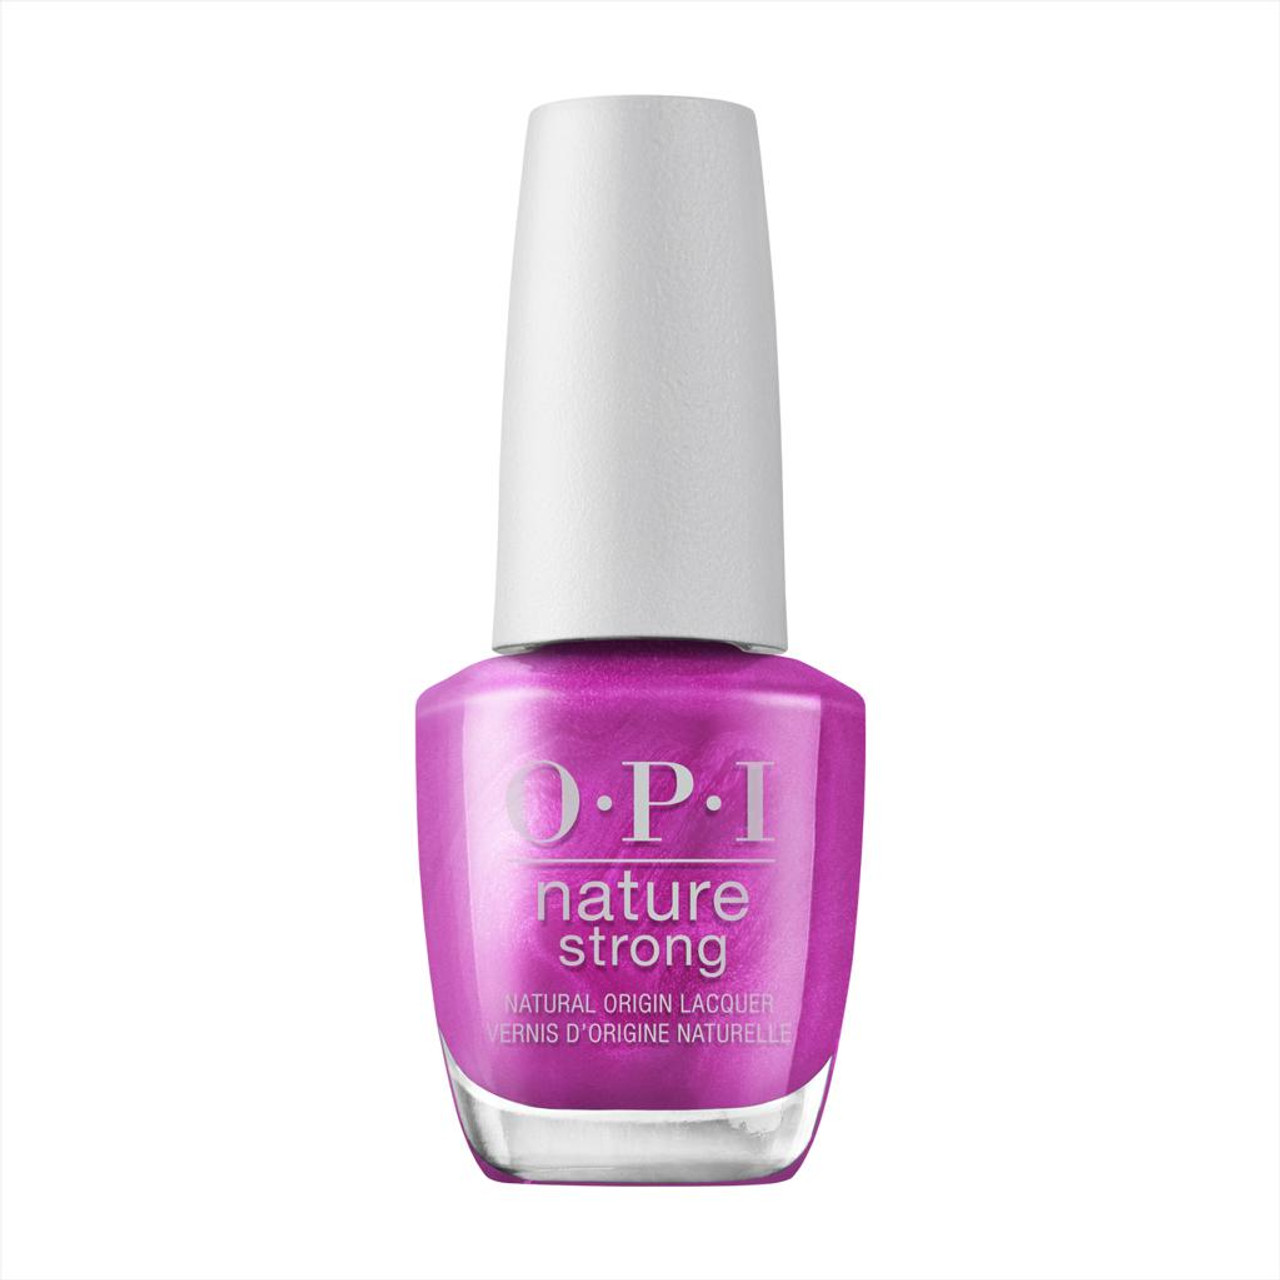 OPI Nature Strong Nail Lacquer Thistle Make You Bloom - .5 Oz / 15 mL